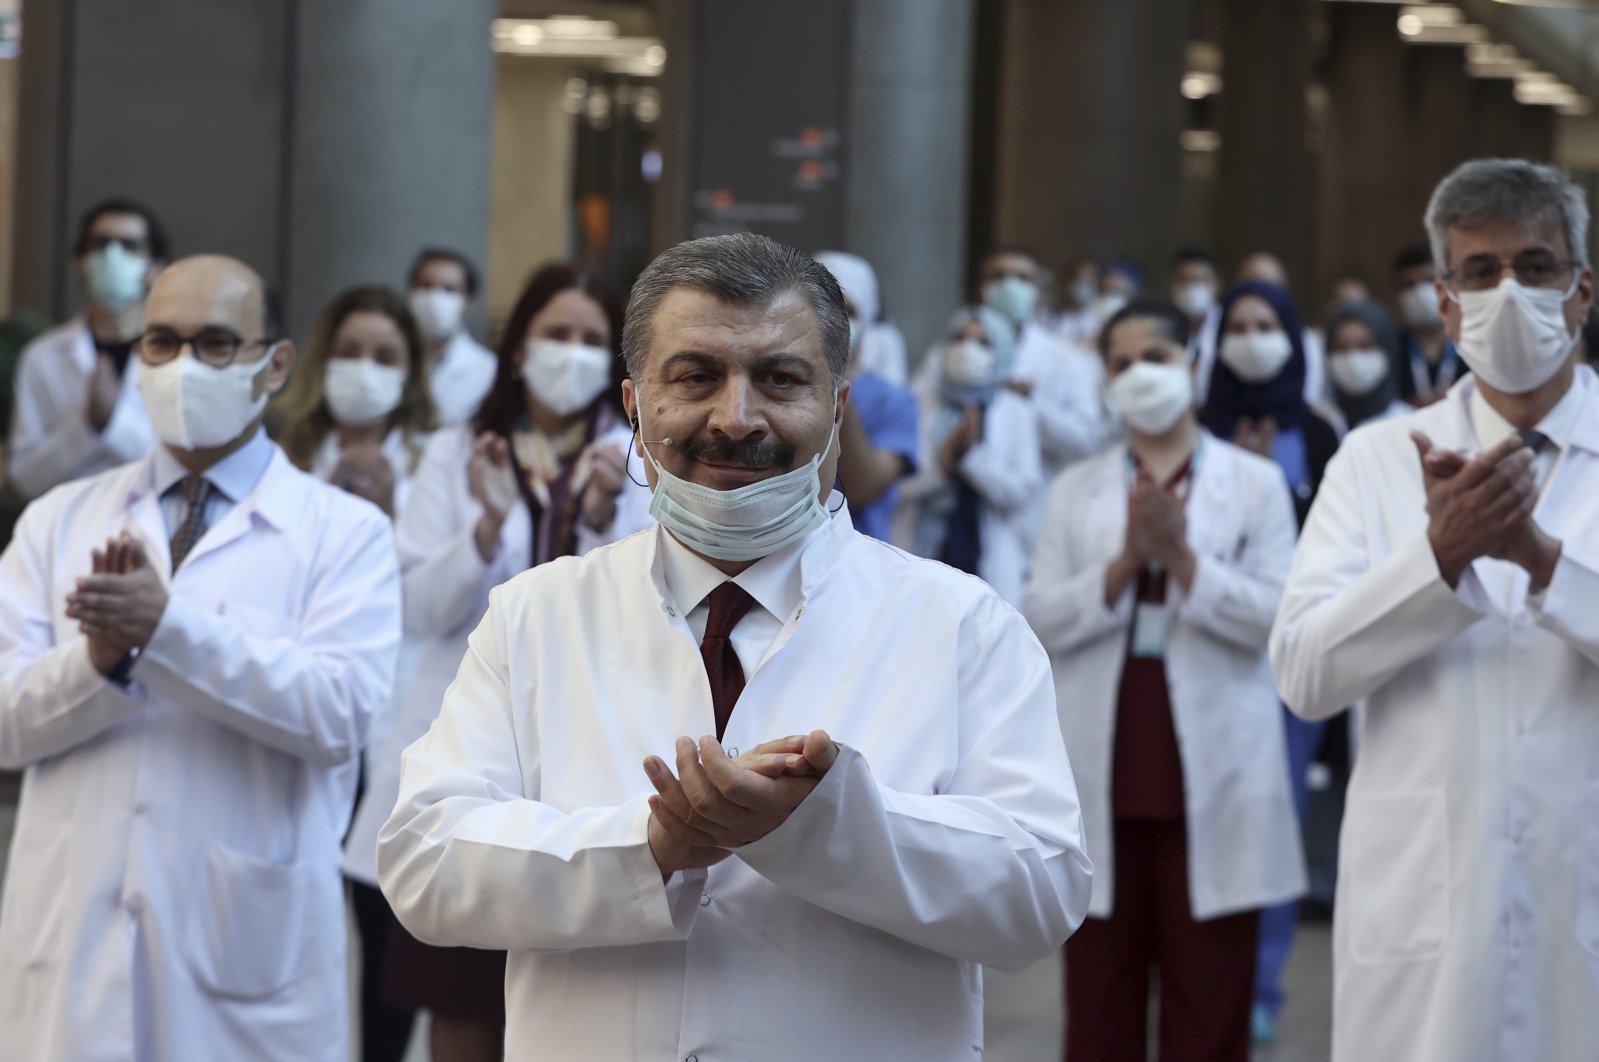 Turkish Health Minister Fahrettin Koca (C) and medical officials applaud during the inauguration ceremony for the Başakşehir City Hospital, a new massive health care complex partially opened to assist in the fight against the COVID-19 outbreak, in Istanbul, April 20, 2020. (AP Photo)